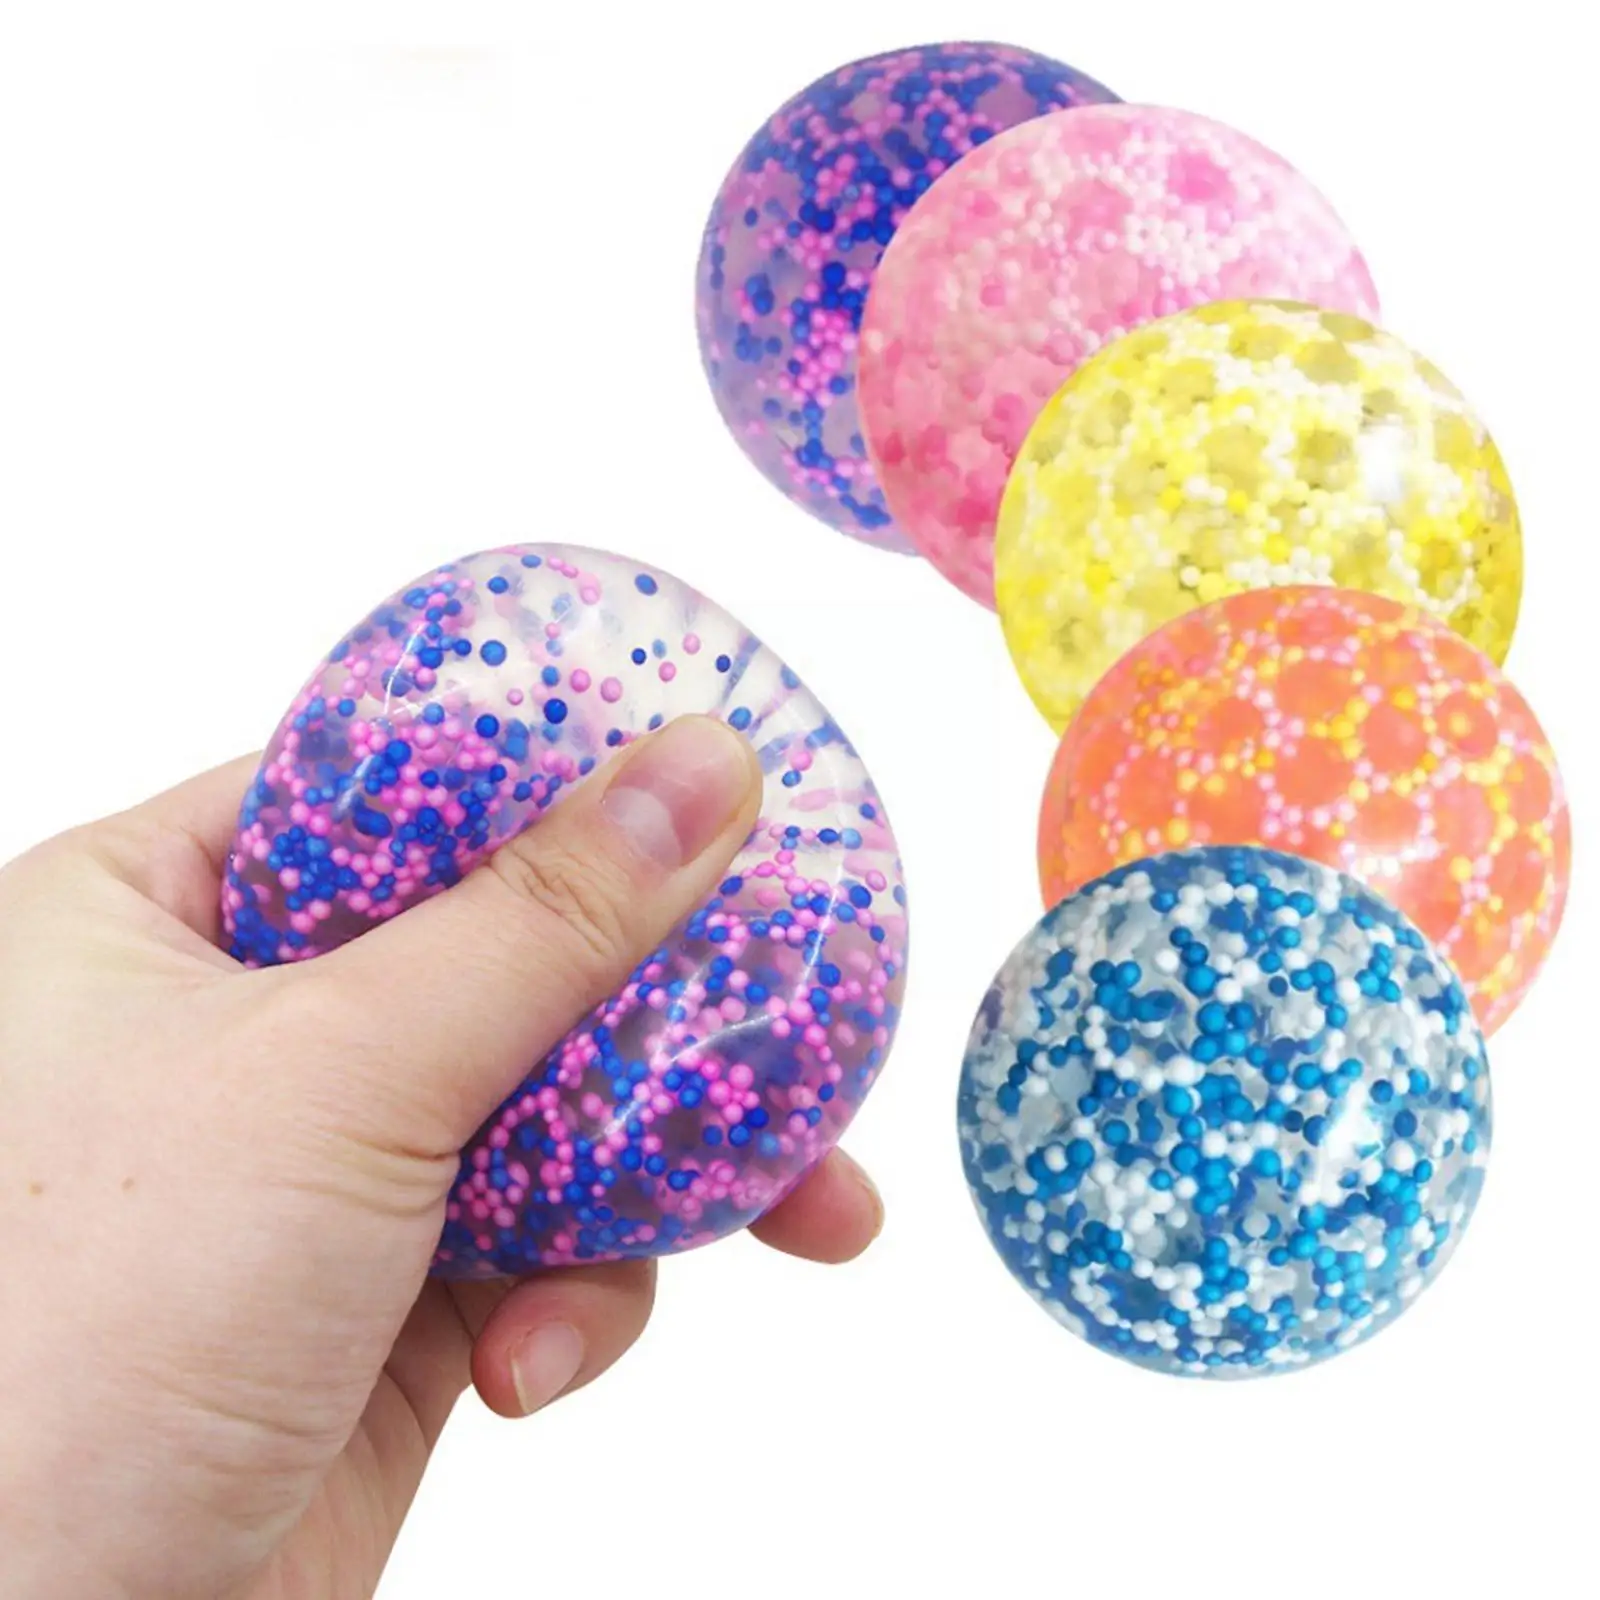 

Stress Relief Squeezing Balls for Kids and Adults Anti-Stress Squishy Color Balls with Water Beads Alleviate Tension Toy B2L0